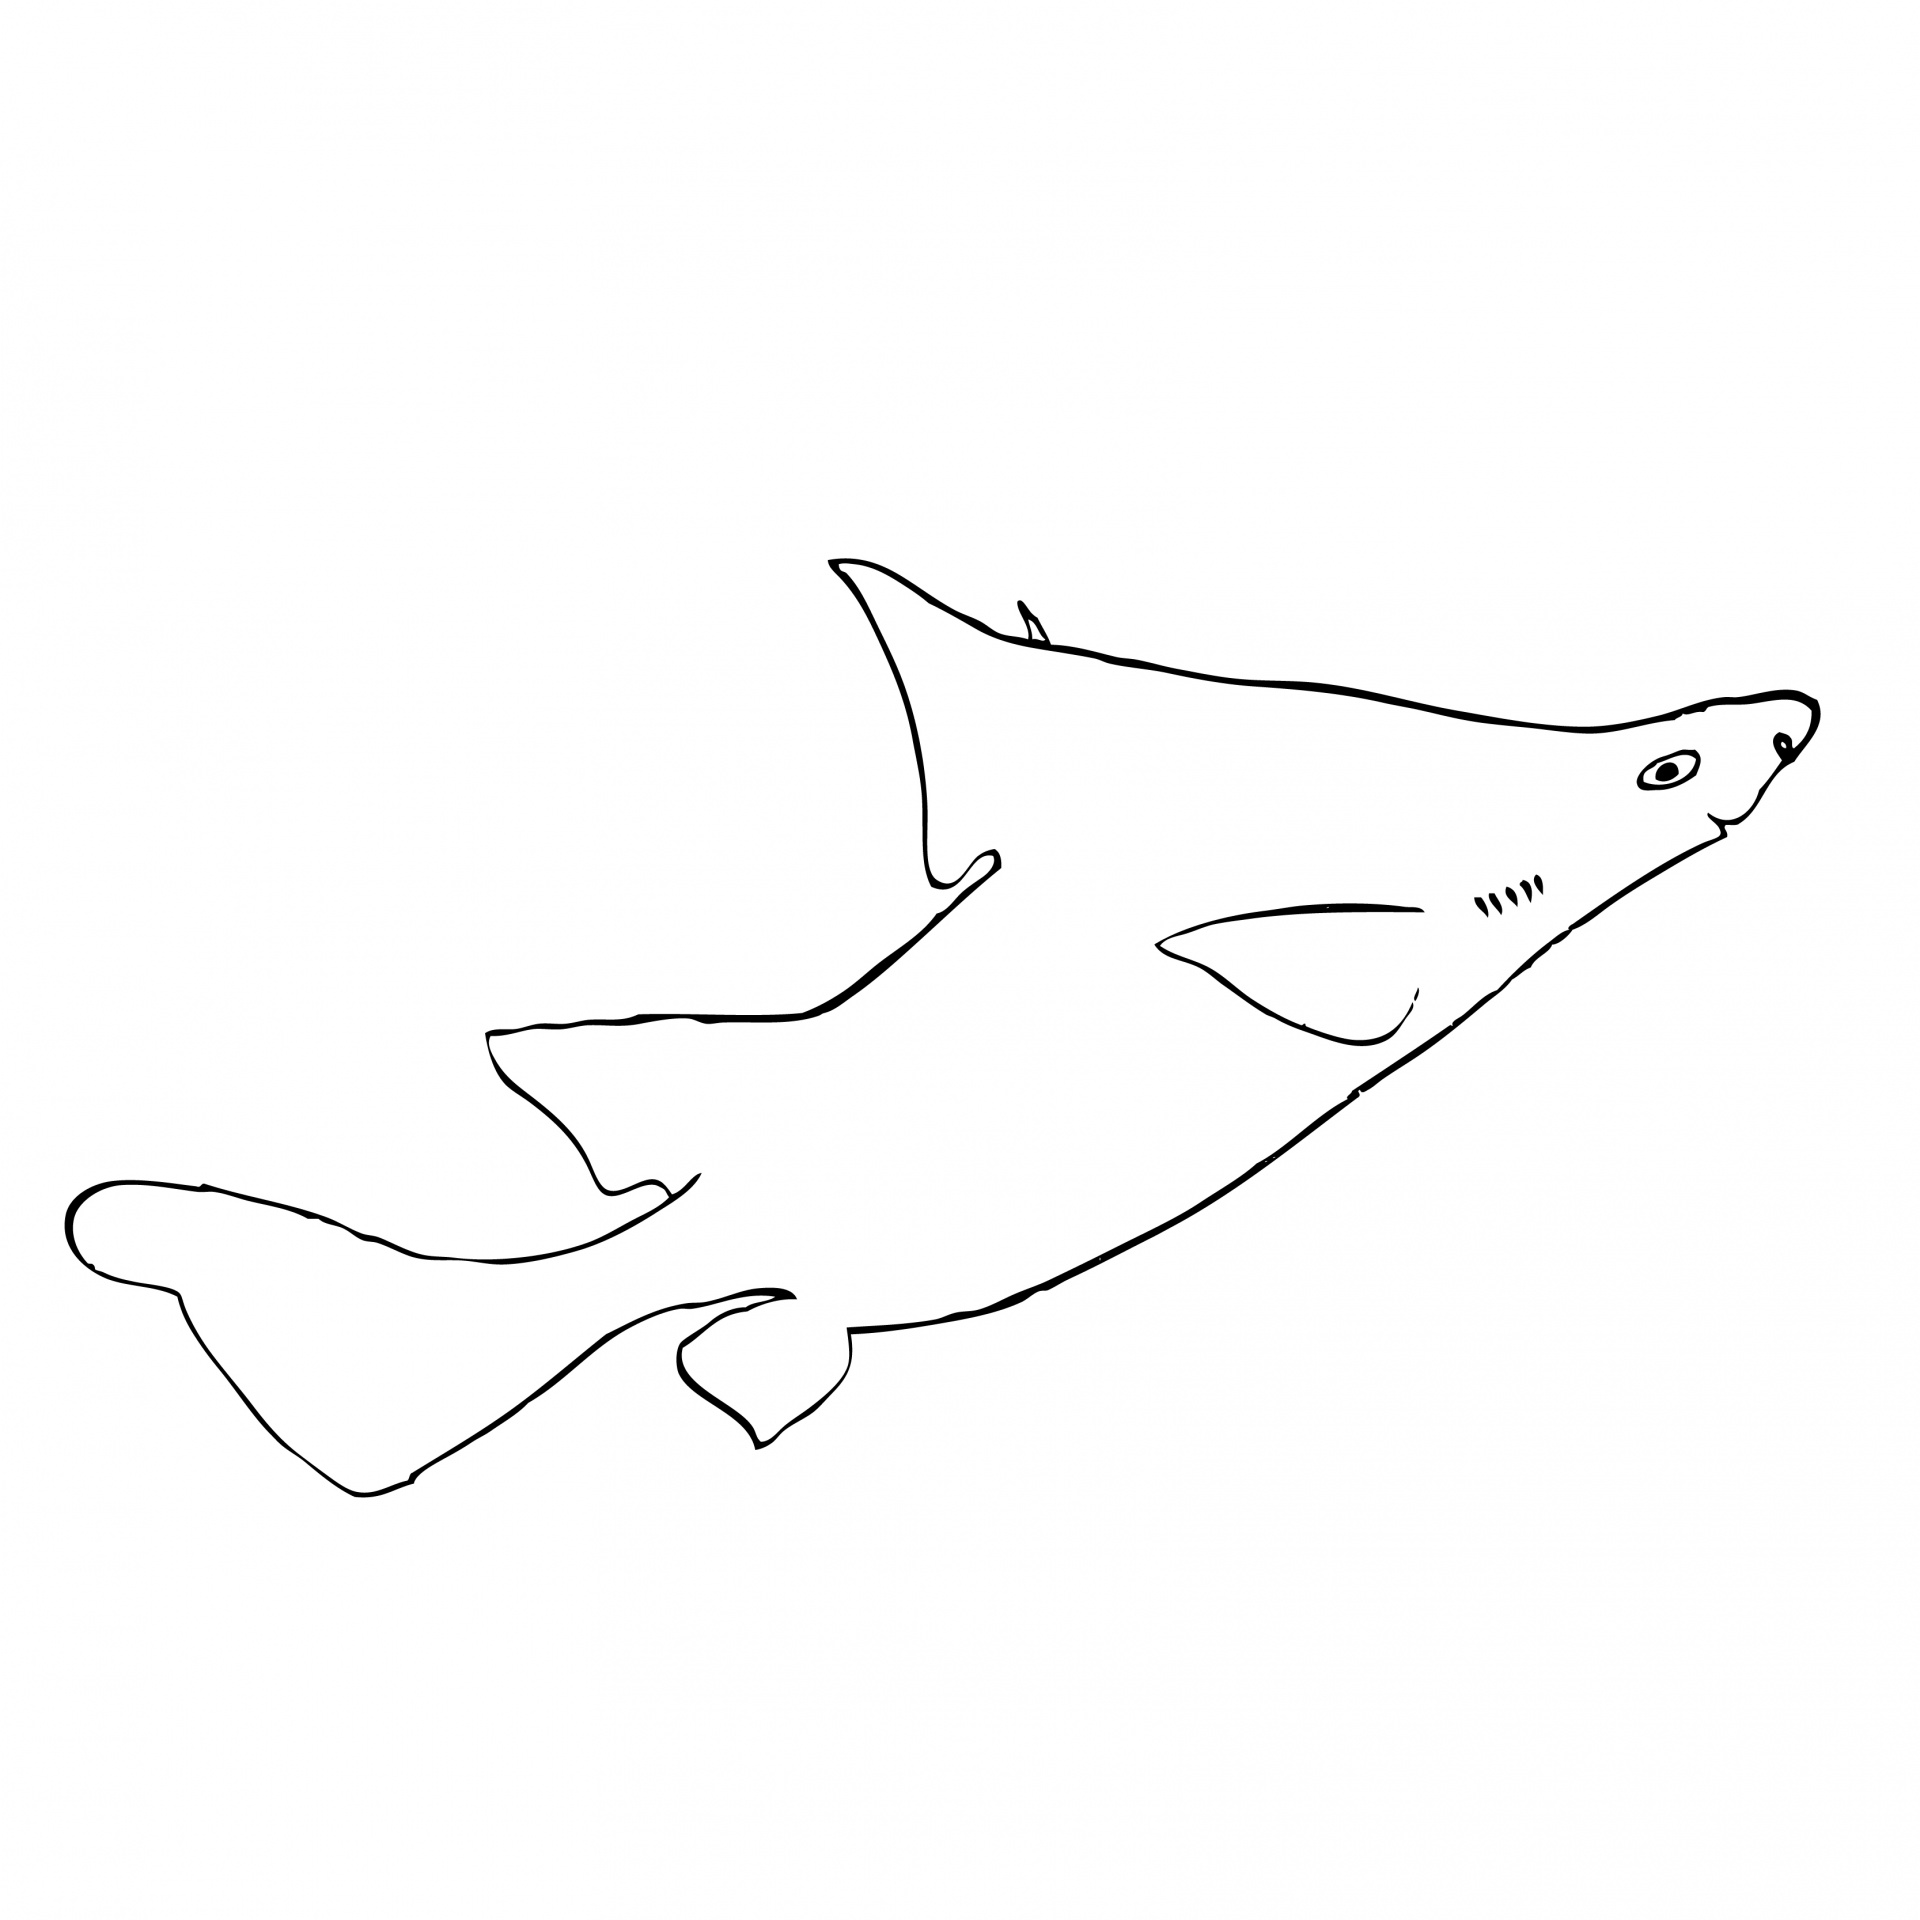 Ryby, obrys dogfish